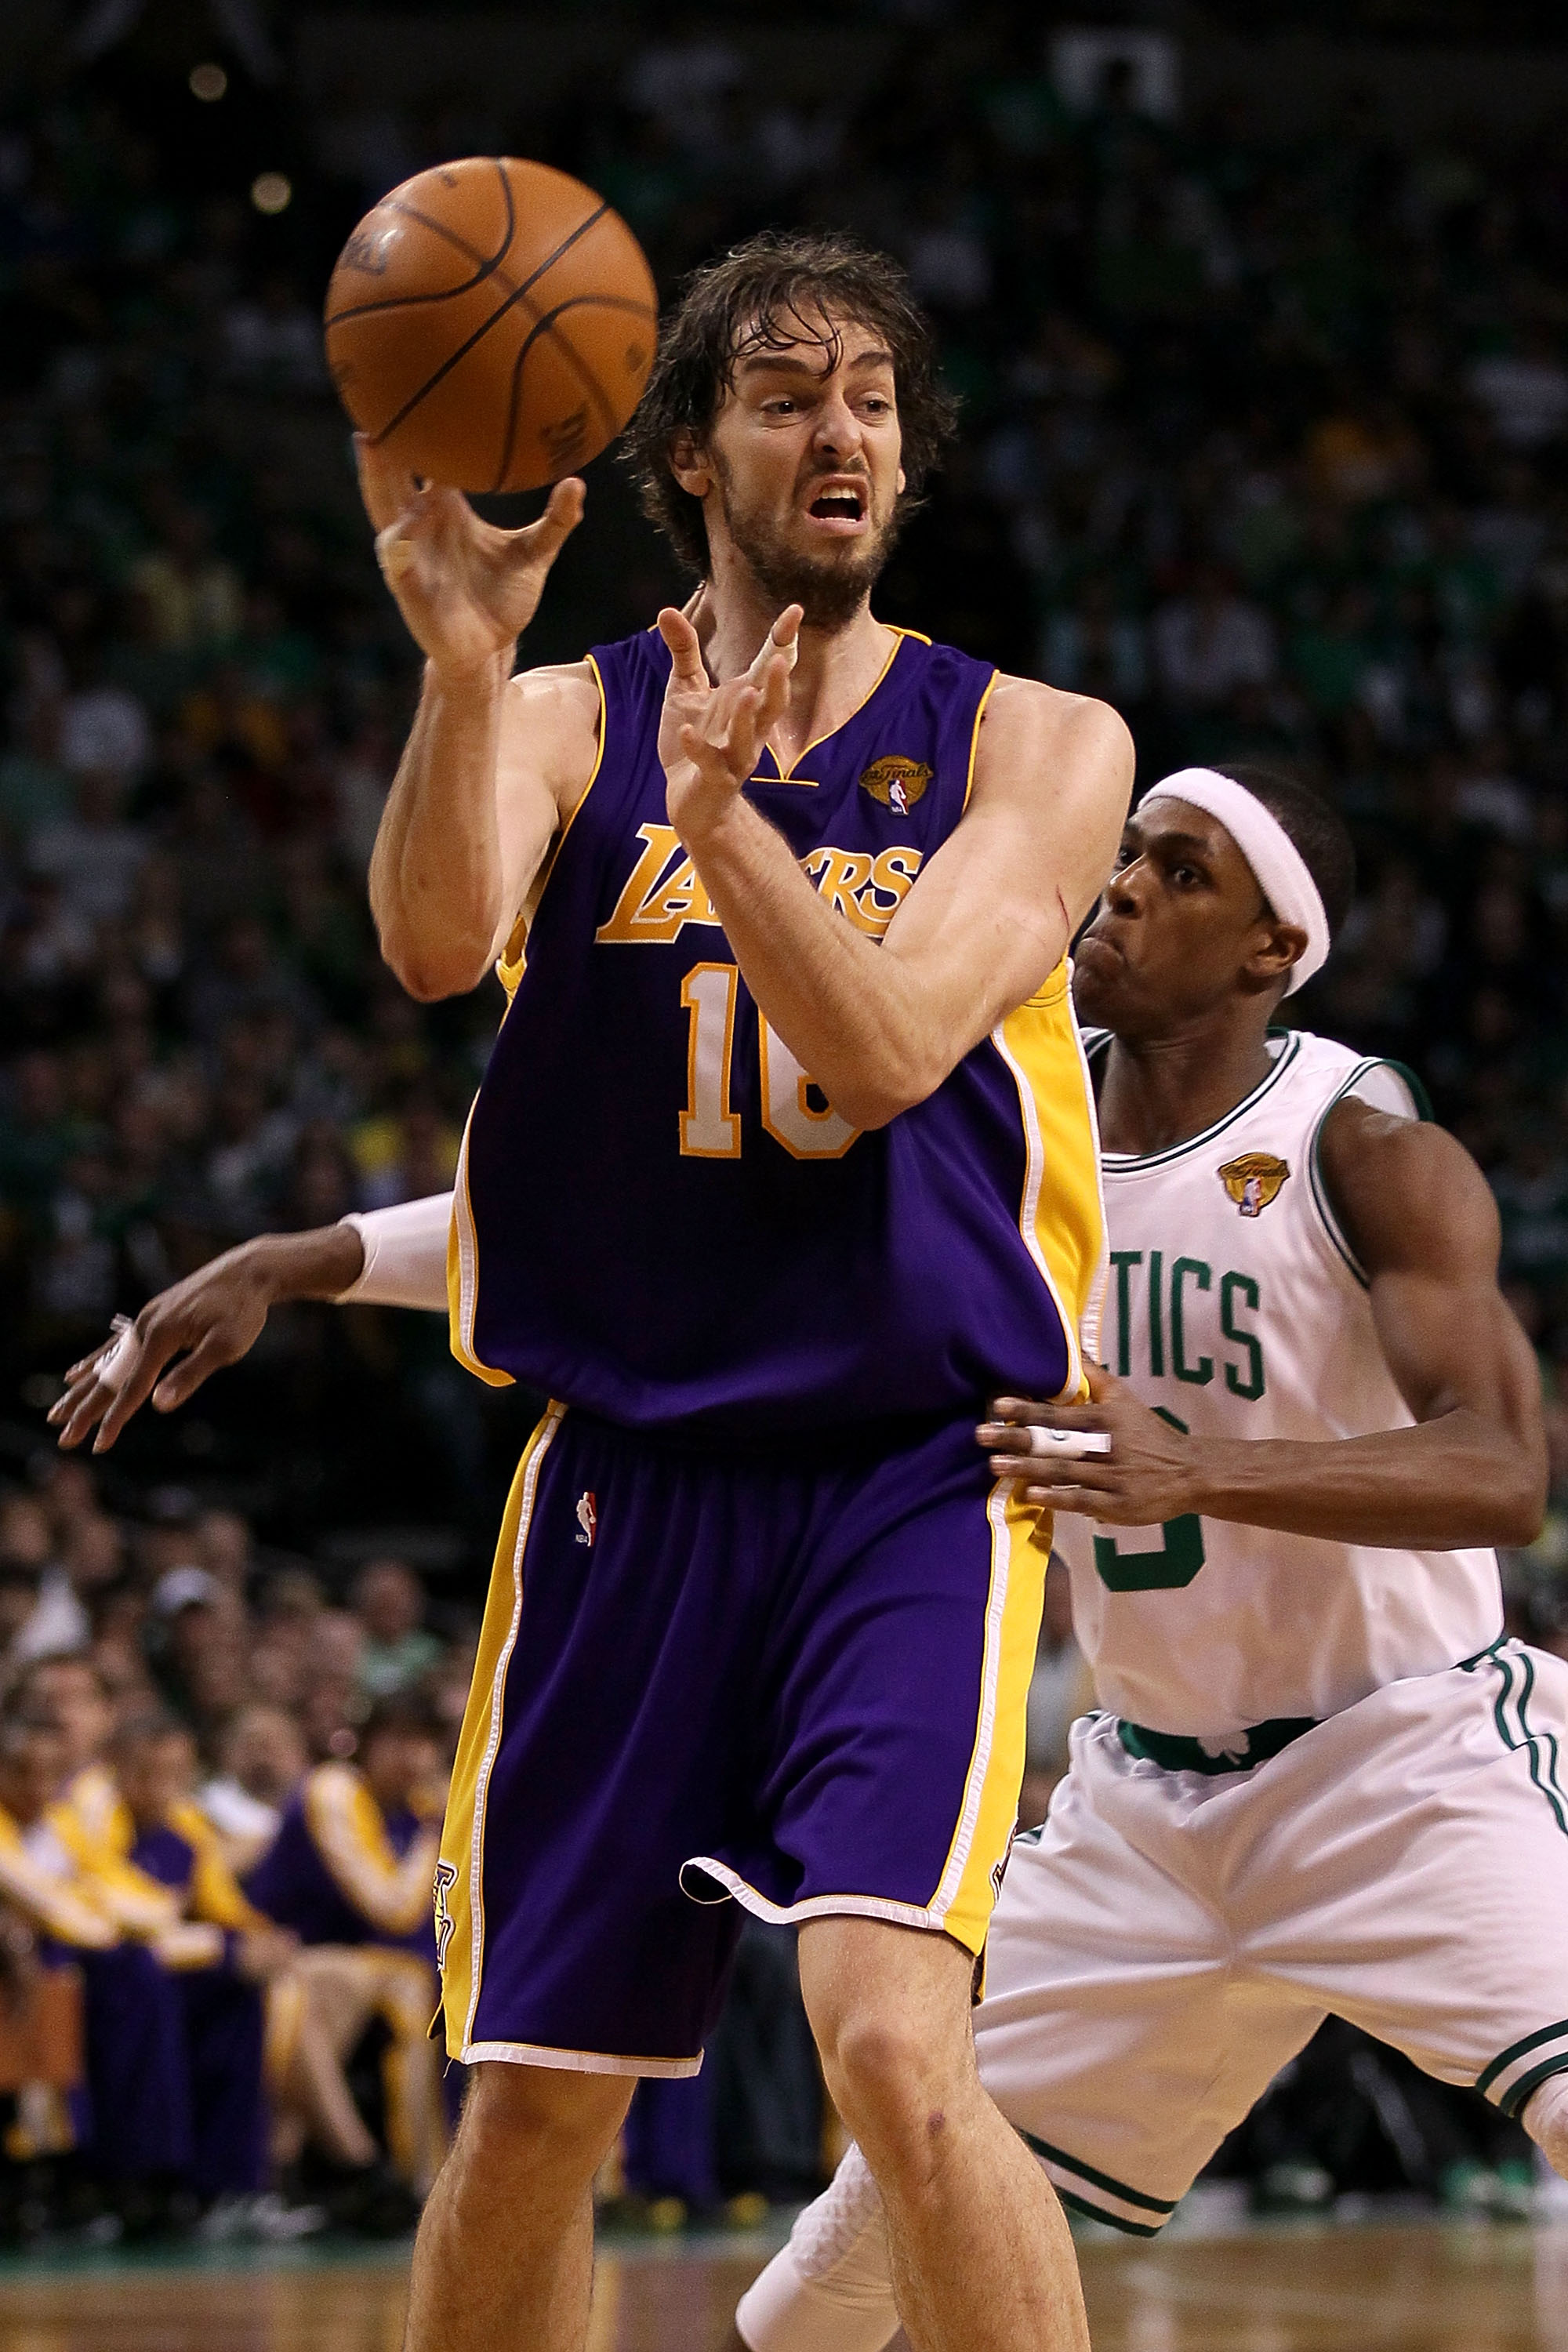 BOSTON - JUNE 13:  Pau Gasol #16 of the Los Angeles Lakers passes the ball against Rajon Rondo #9 of the Boston Celtics during Game Five of the 2010 NBA Finals on June 13, 2010 at TD Garden in Boston, Massachusetts. The Celtics won 92-86.  NOTE TO USER: U